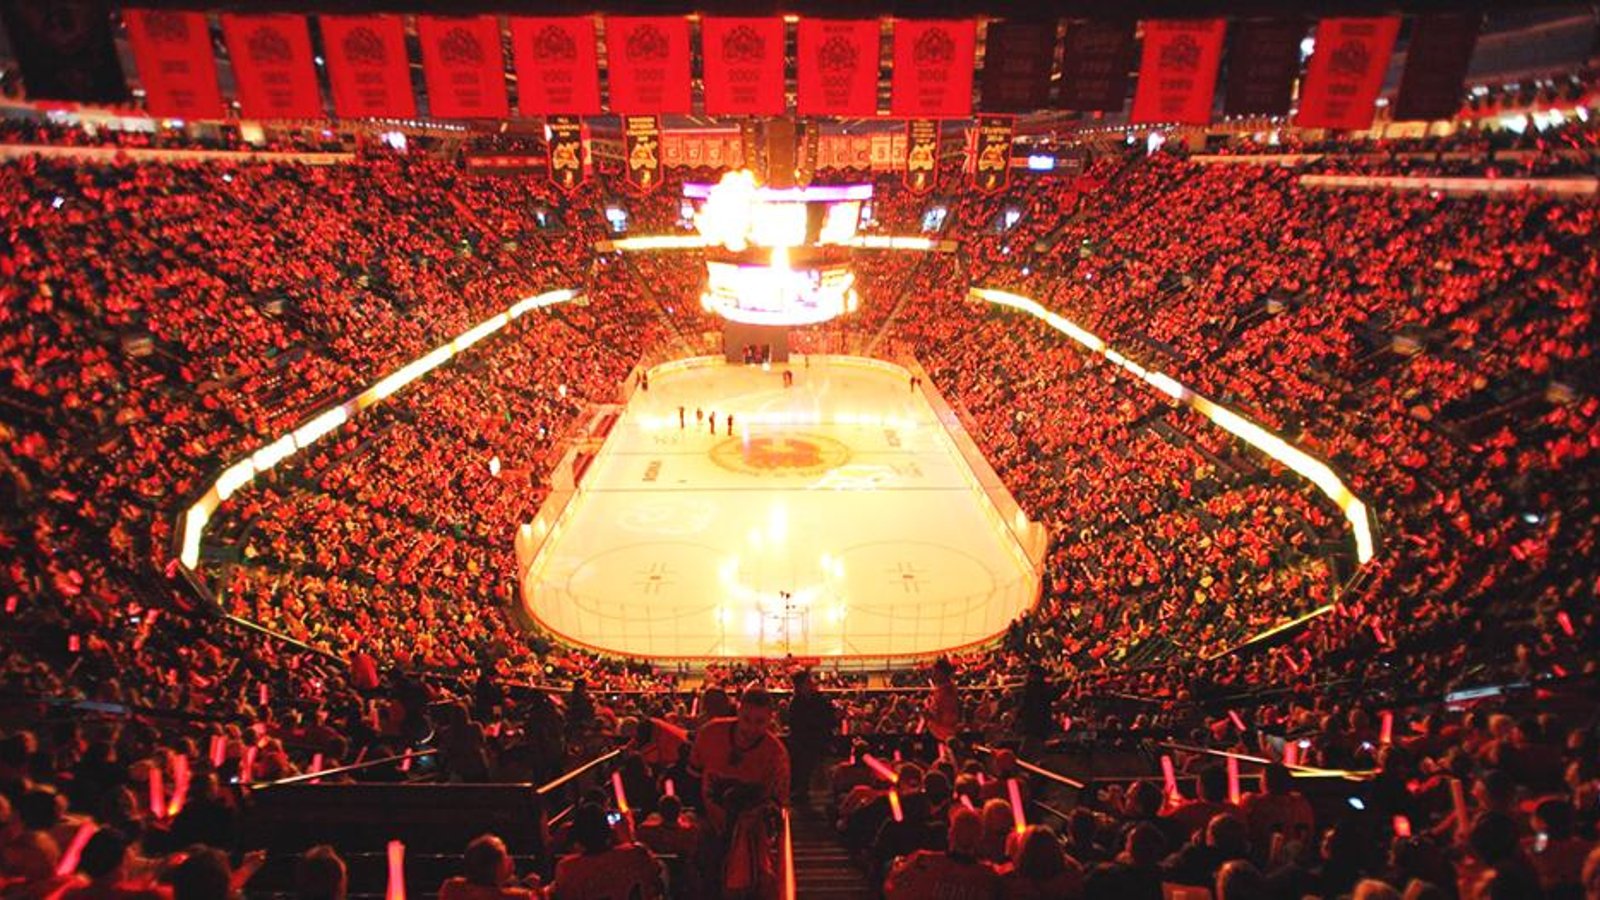 Report: Major hint that Flames are set for relocation